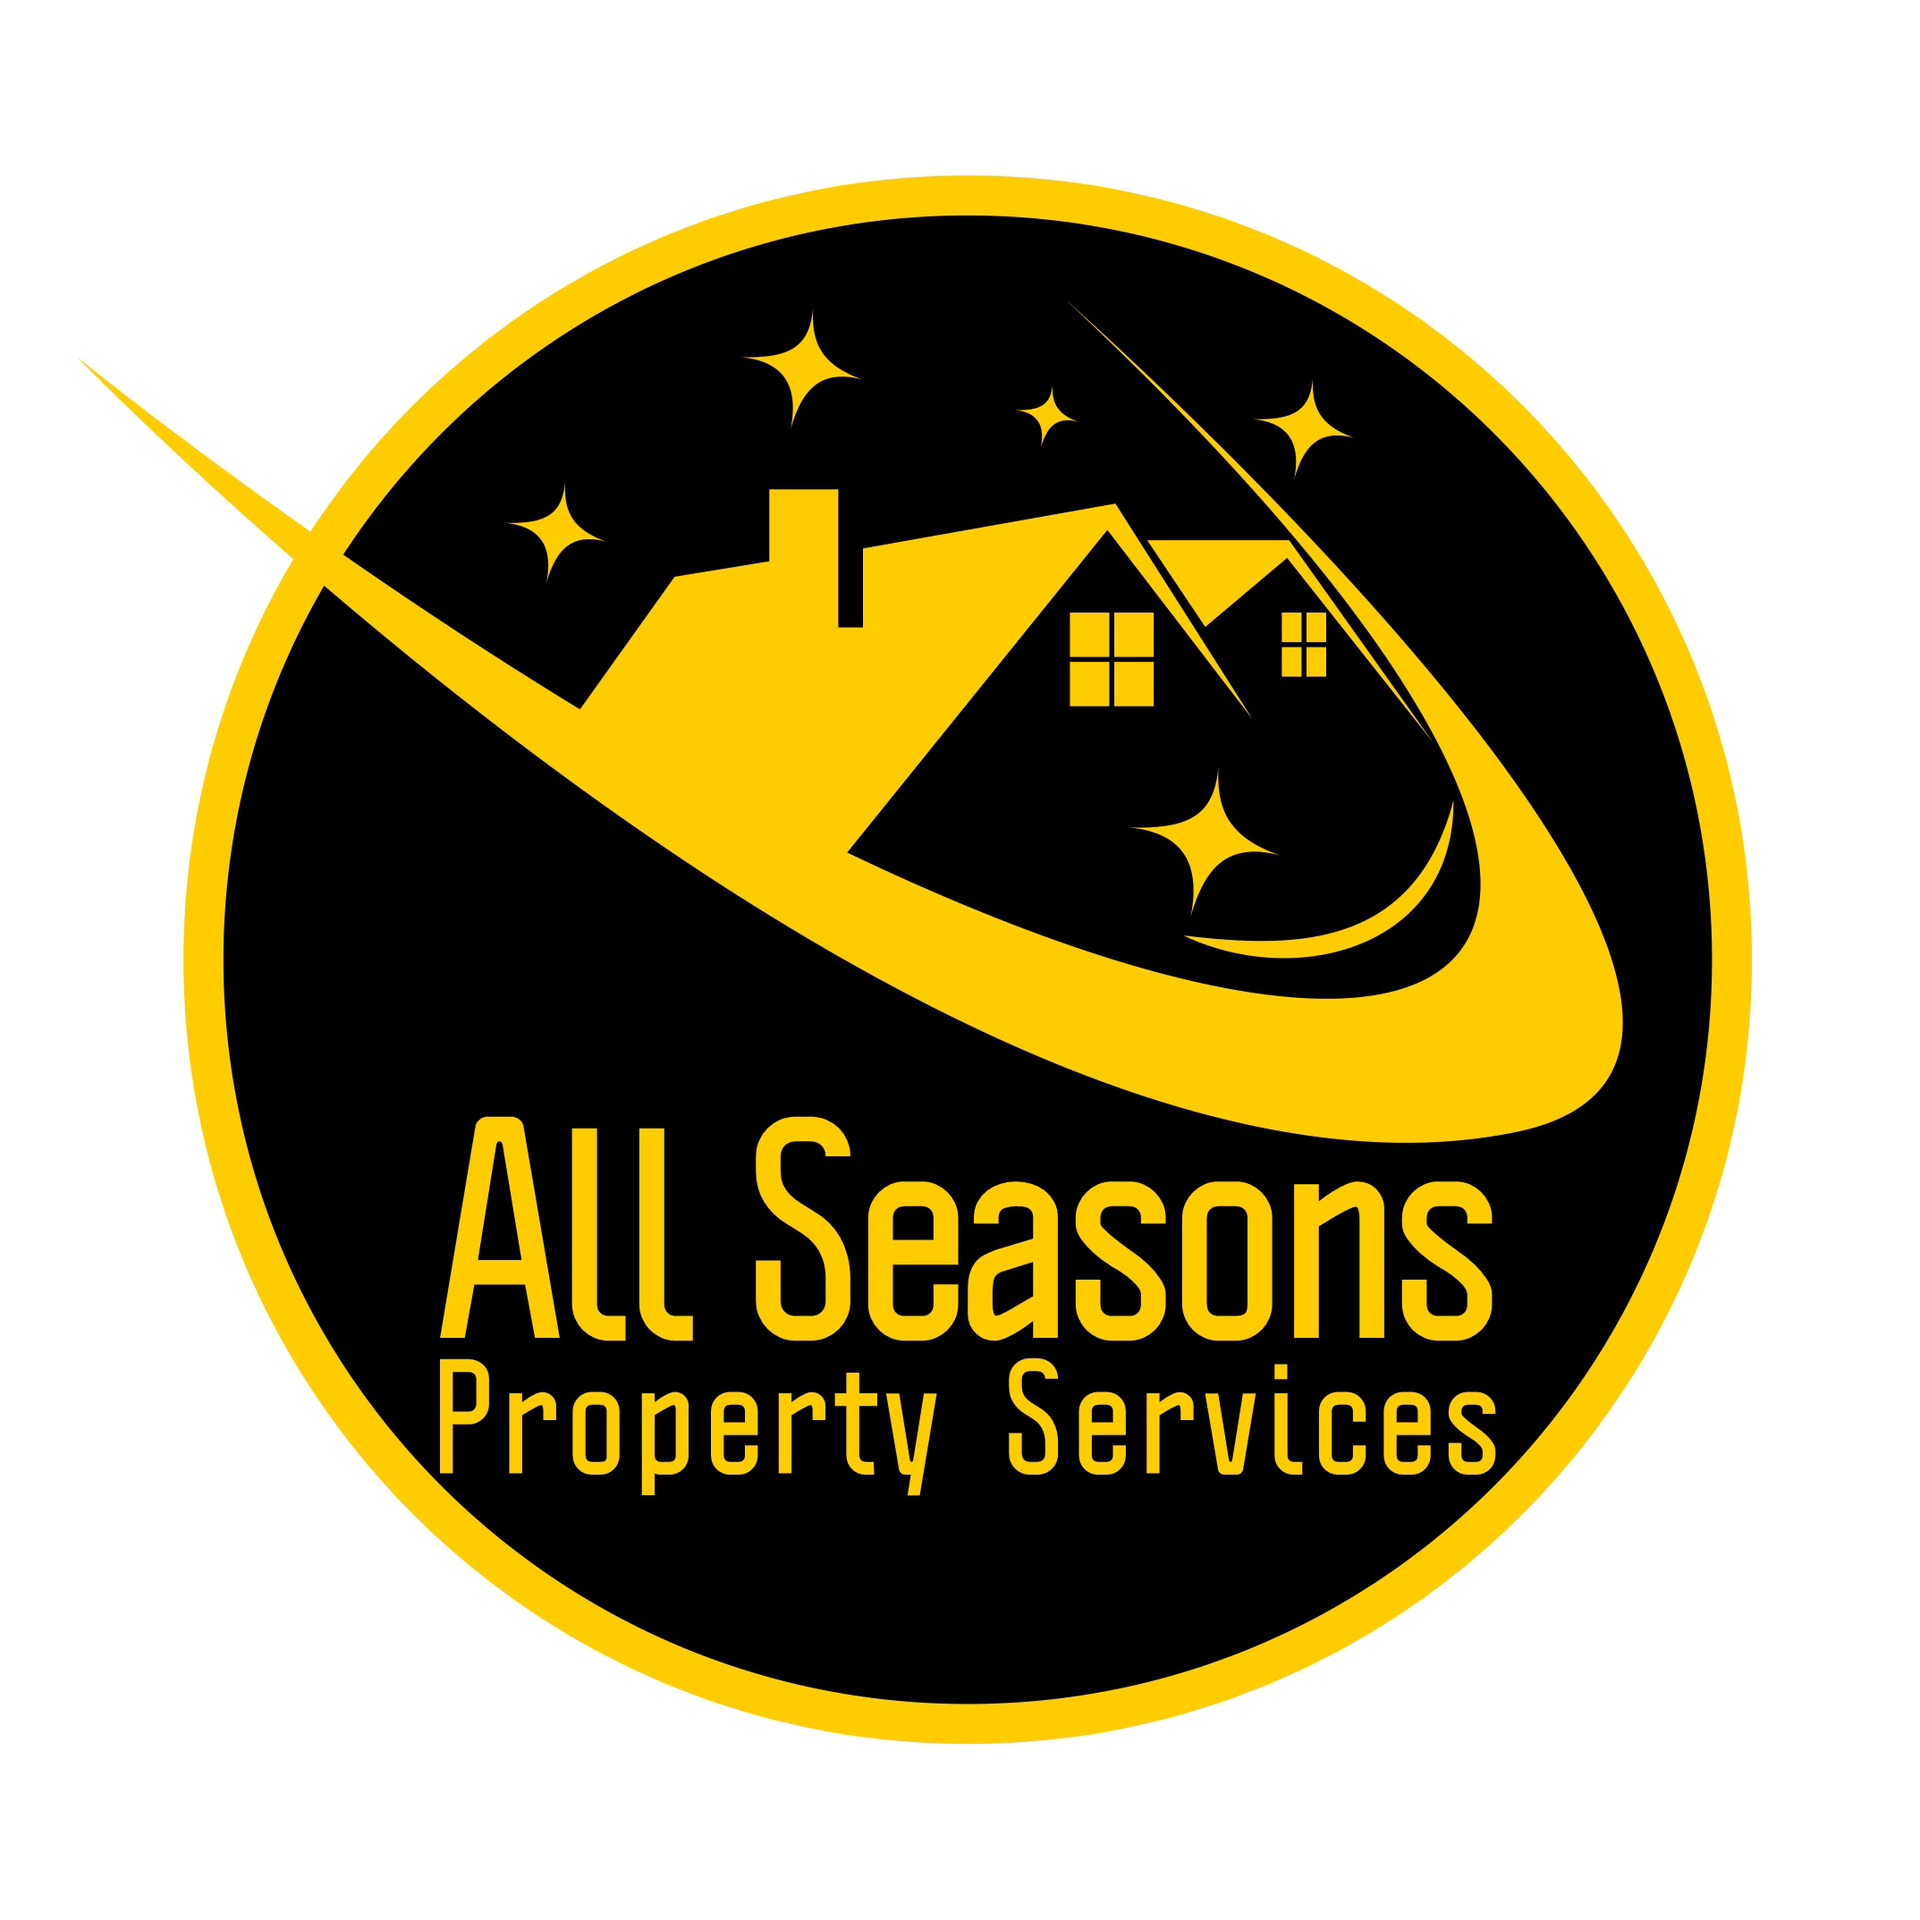 All Seasons Property Services